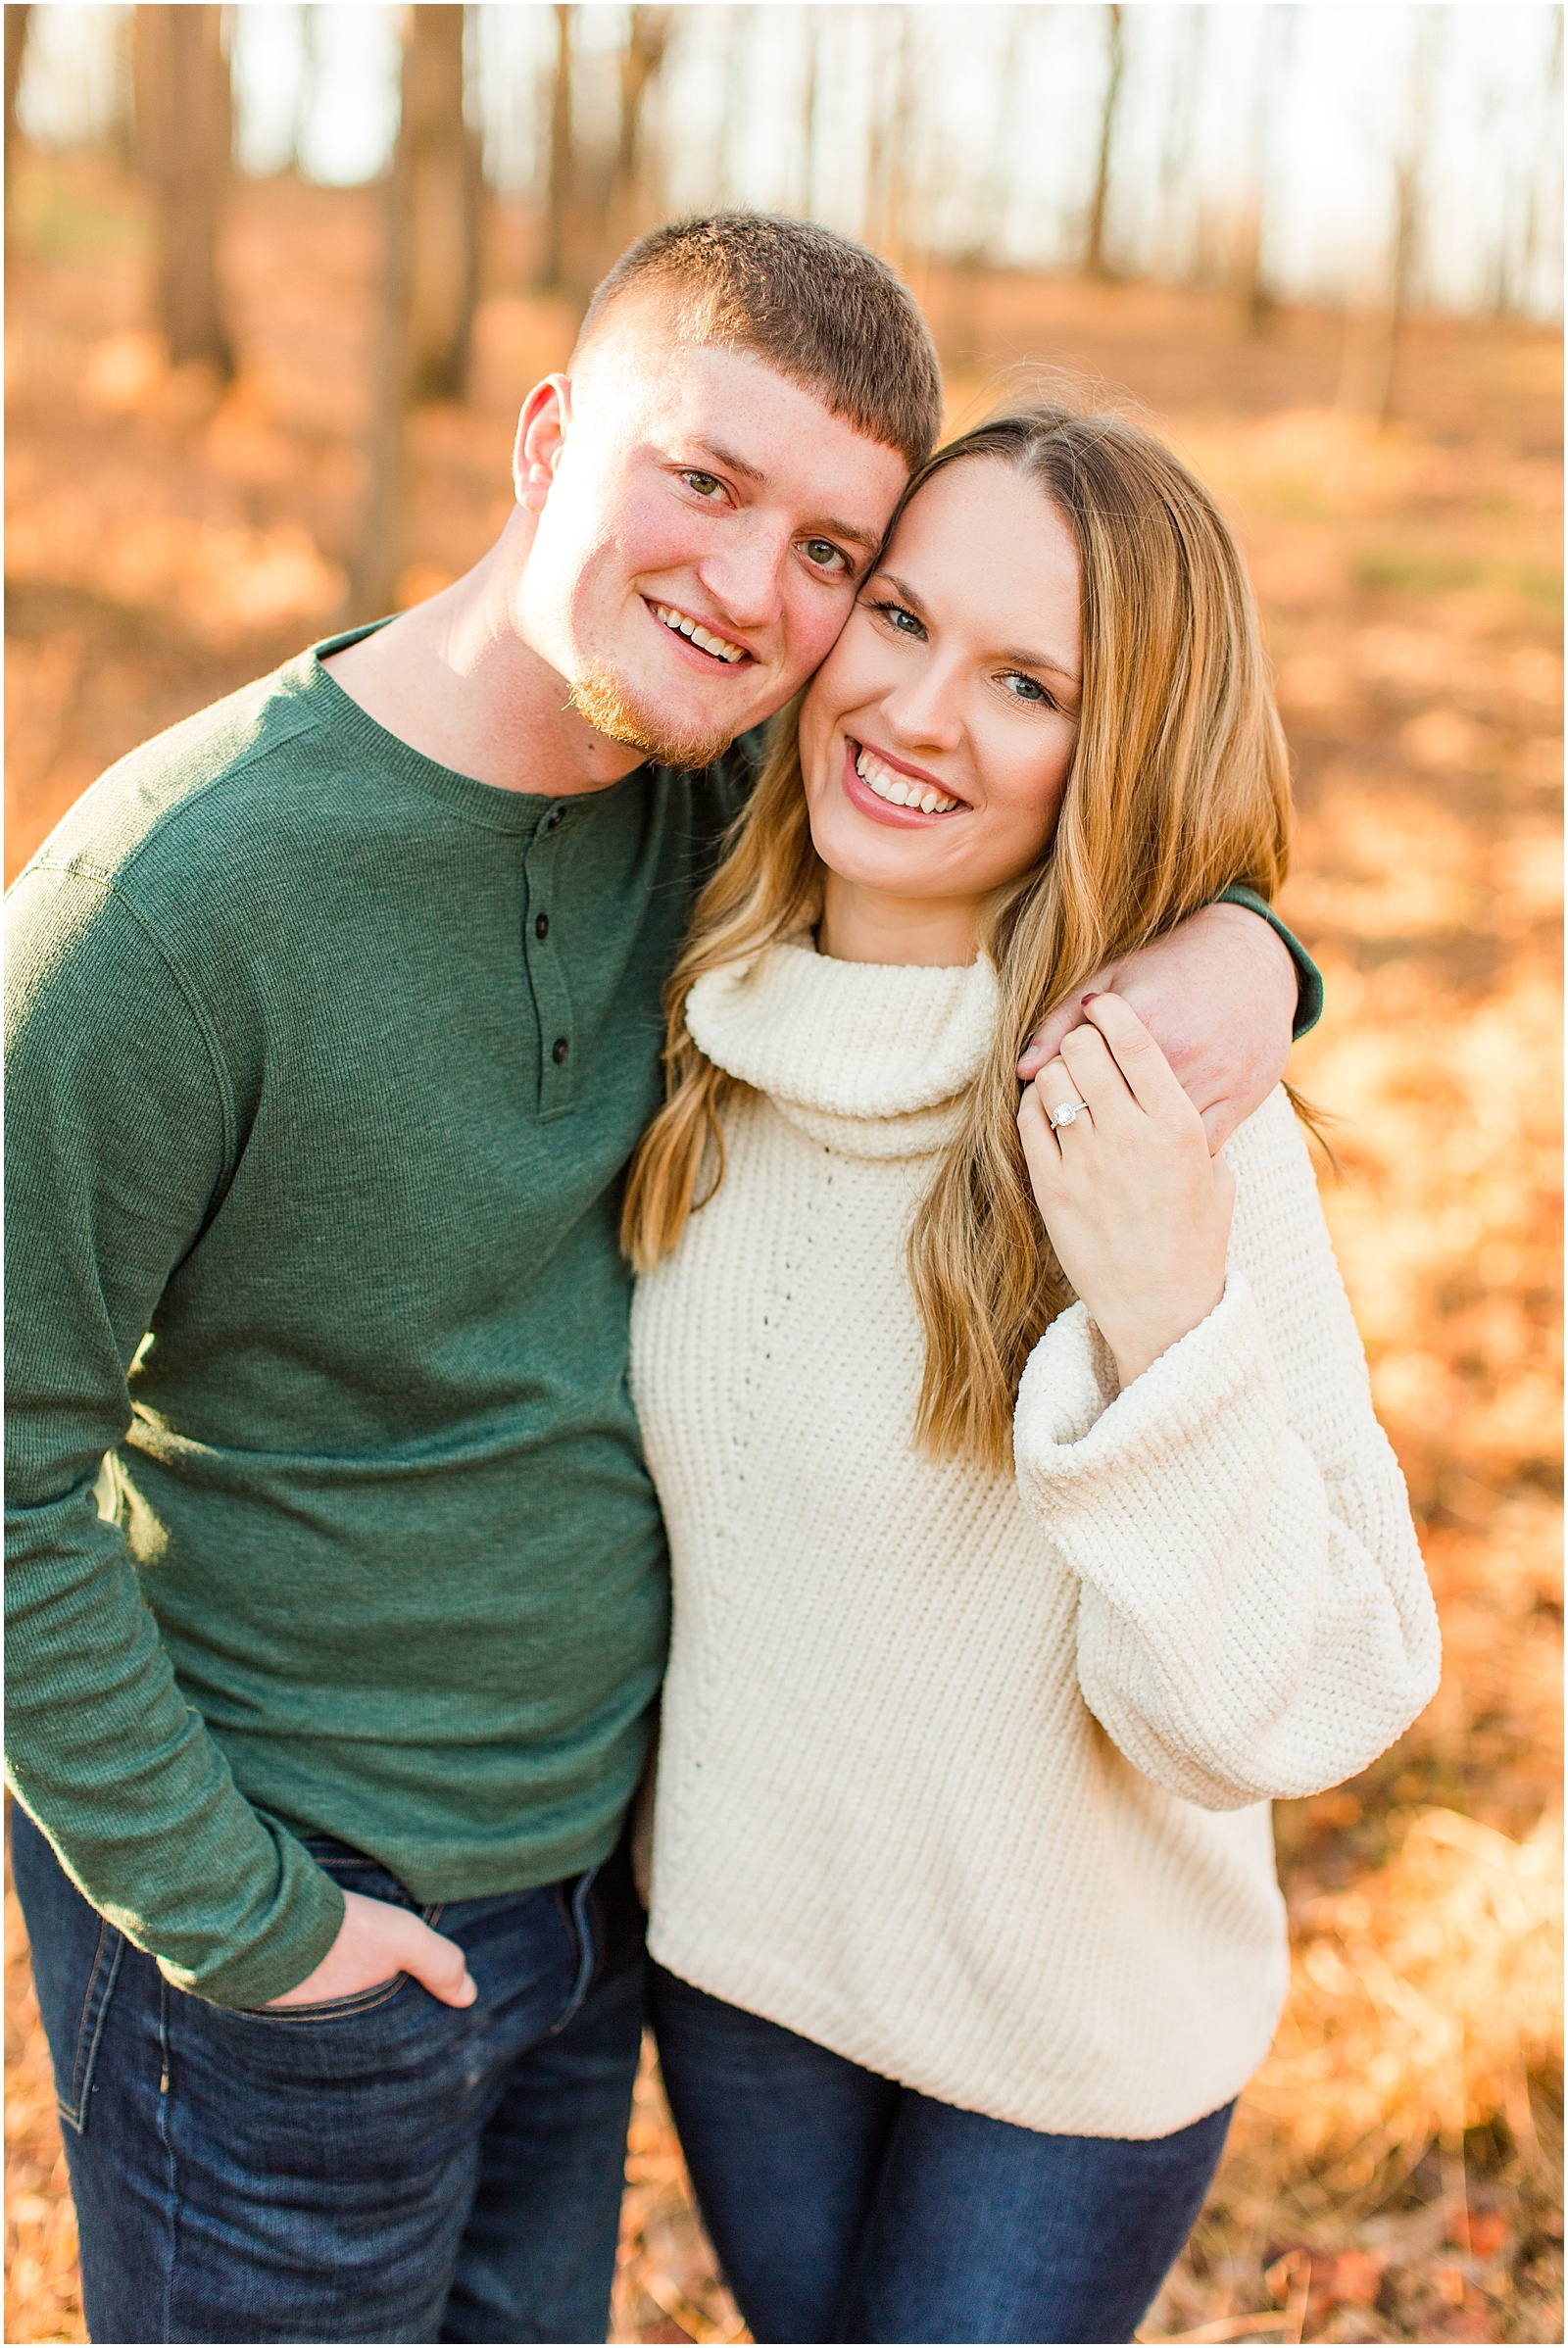 A Fall Southern Indiana Engagement Seesion | Cody and Hannah | Bret and Brandie Photography 026.jpg